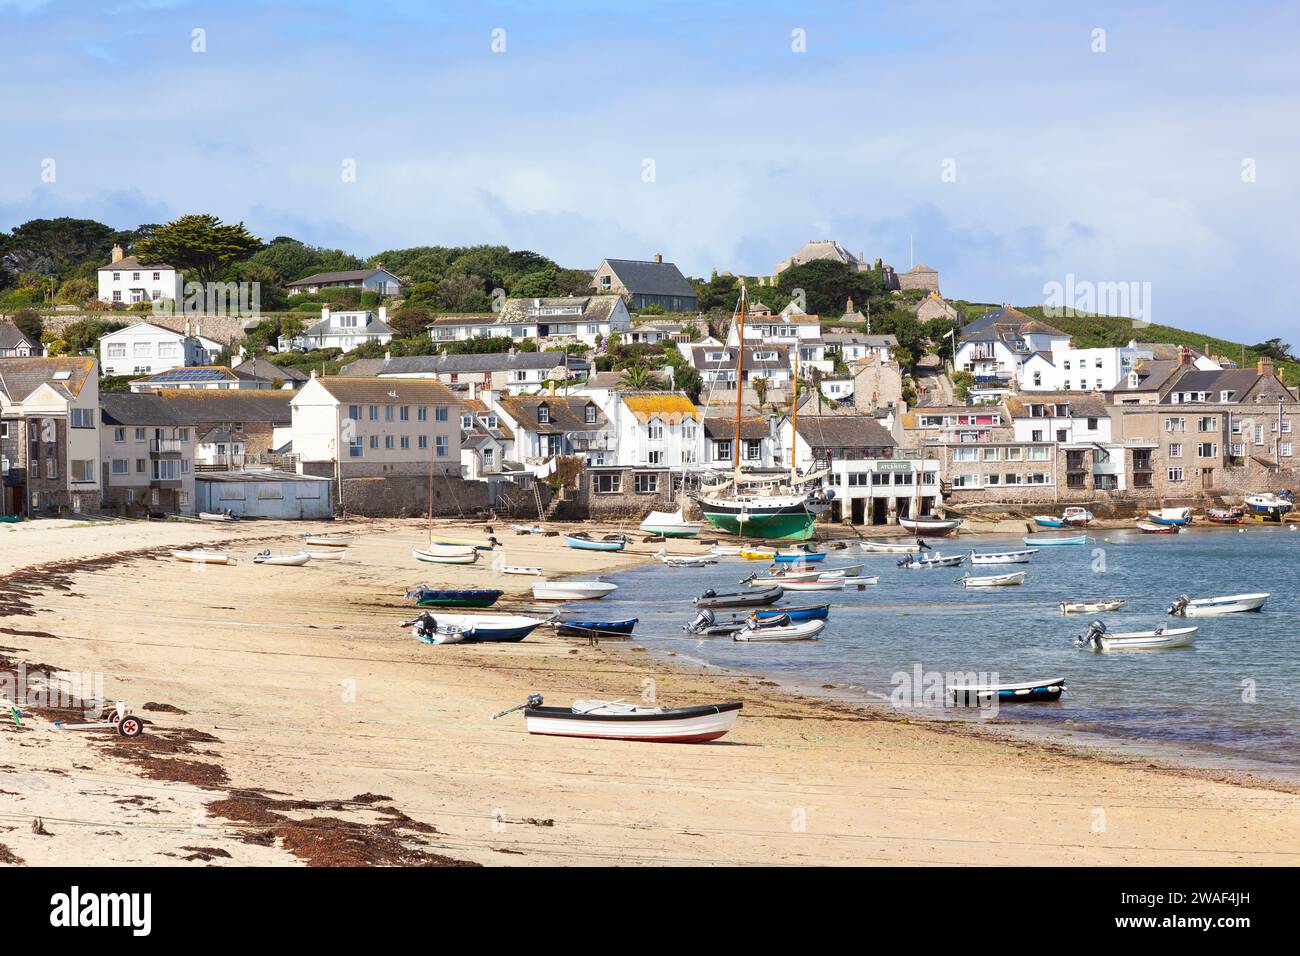 Town Beach, St Mary's, Isles of Scilly Foto Stock